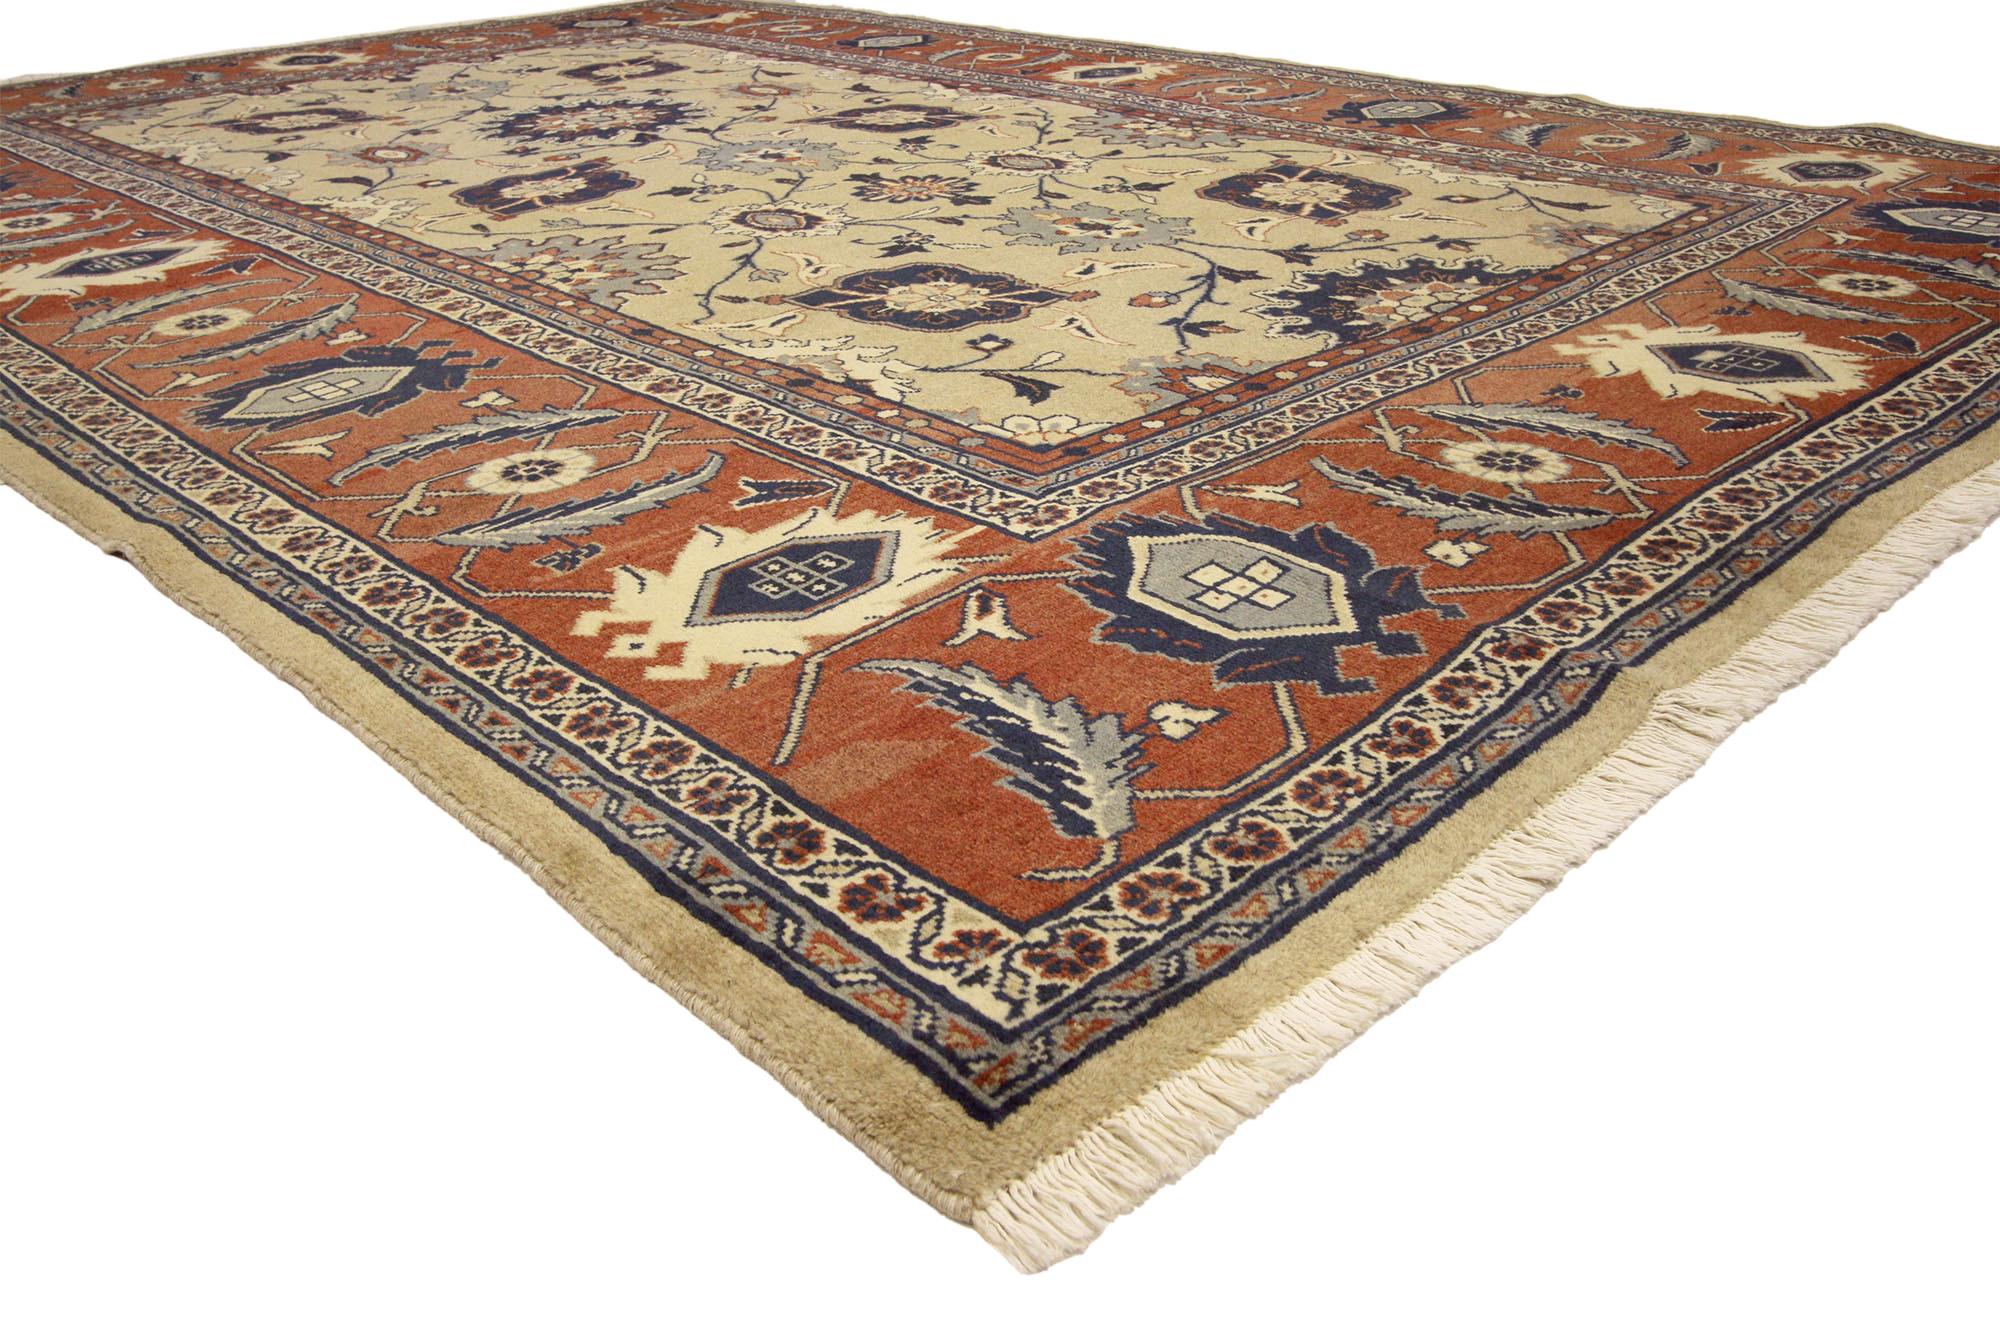 75849 Vintage Persian Mahal Rug, 07'01 X 10'06. Originating from the Mahallat region in central Northwestern Iran, Persian Mahal rugs emerge as exquisite embodiments of unparalleled craftsmanship and distinctive characteristics. These rugs are